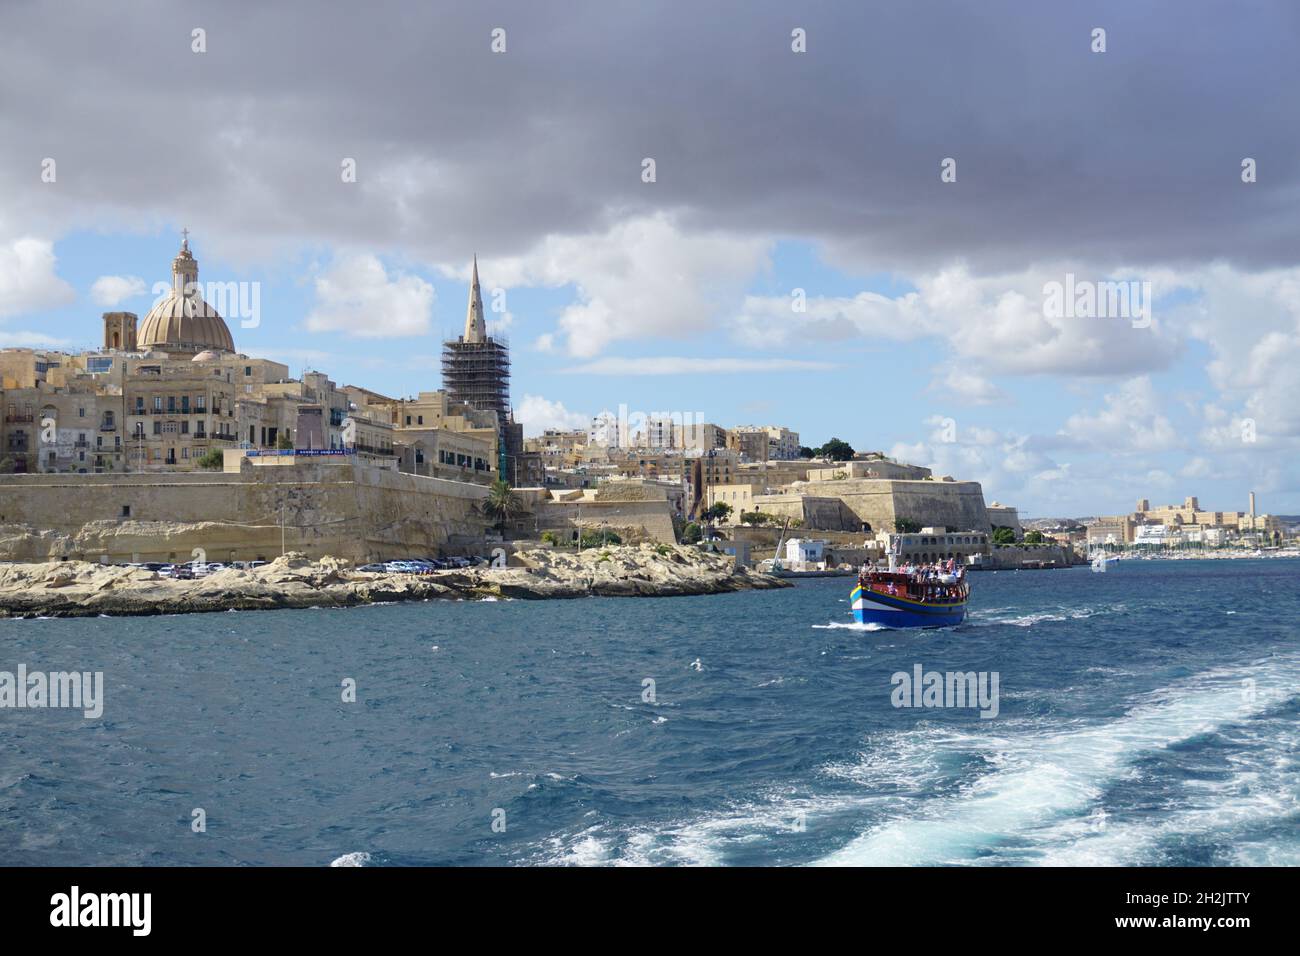 view from a boat at the Capital city Valletta on the island of Malta. Photo by Willy Matheisl Stock Photo